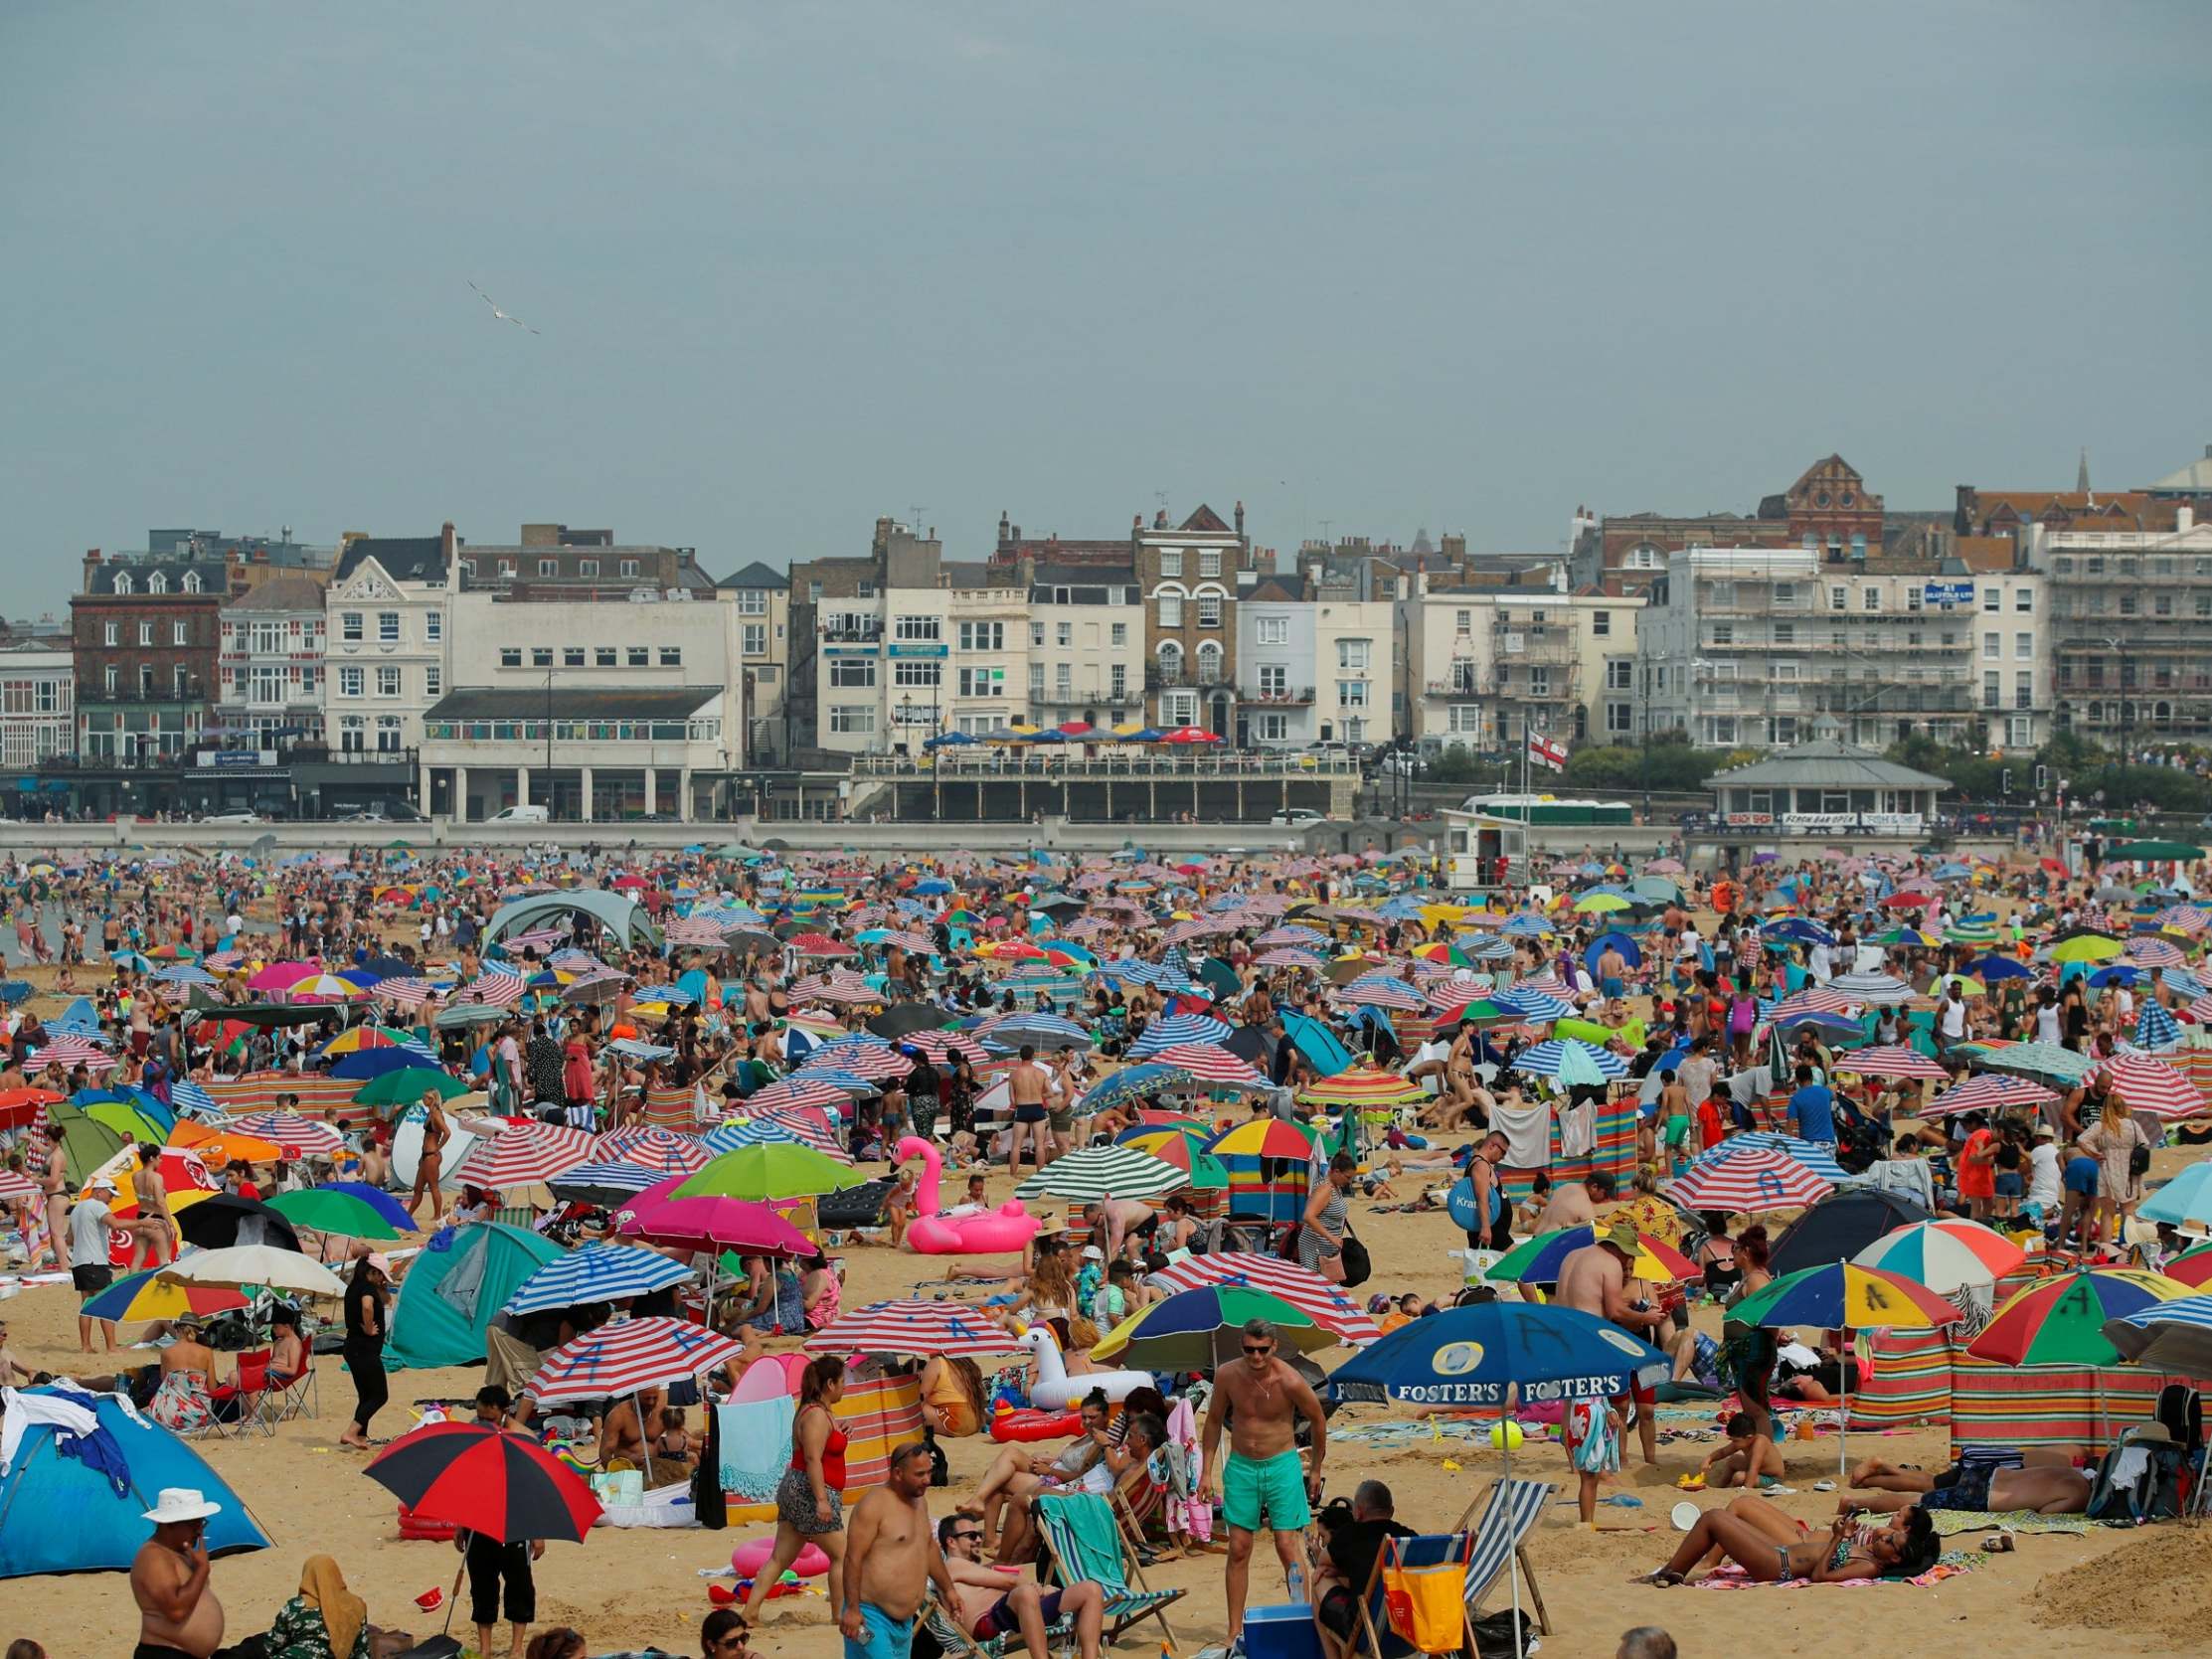 People enjoy the hot weather on Margate beach (Reuters)